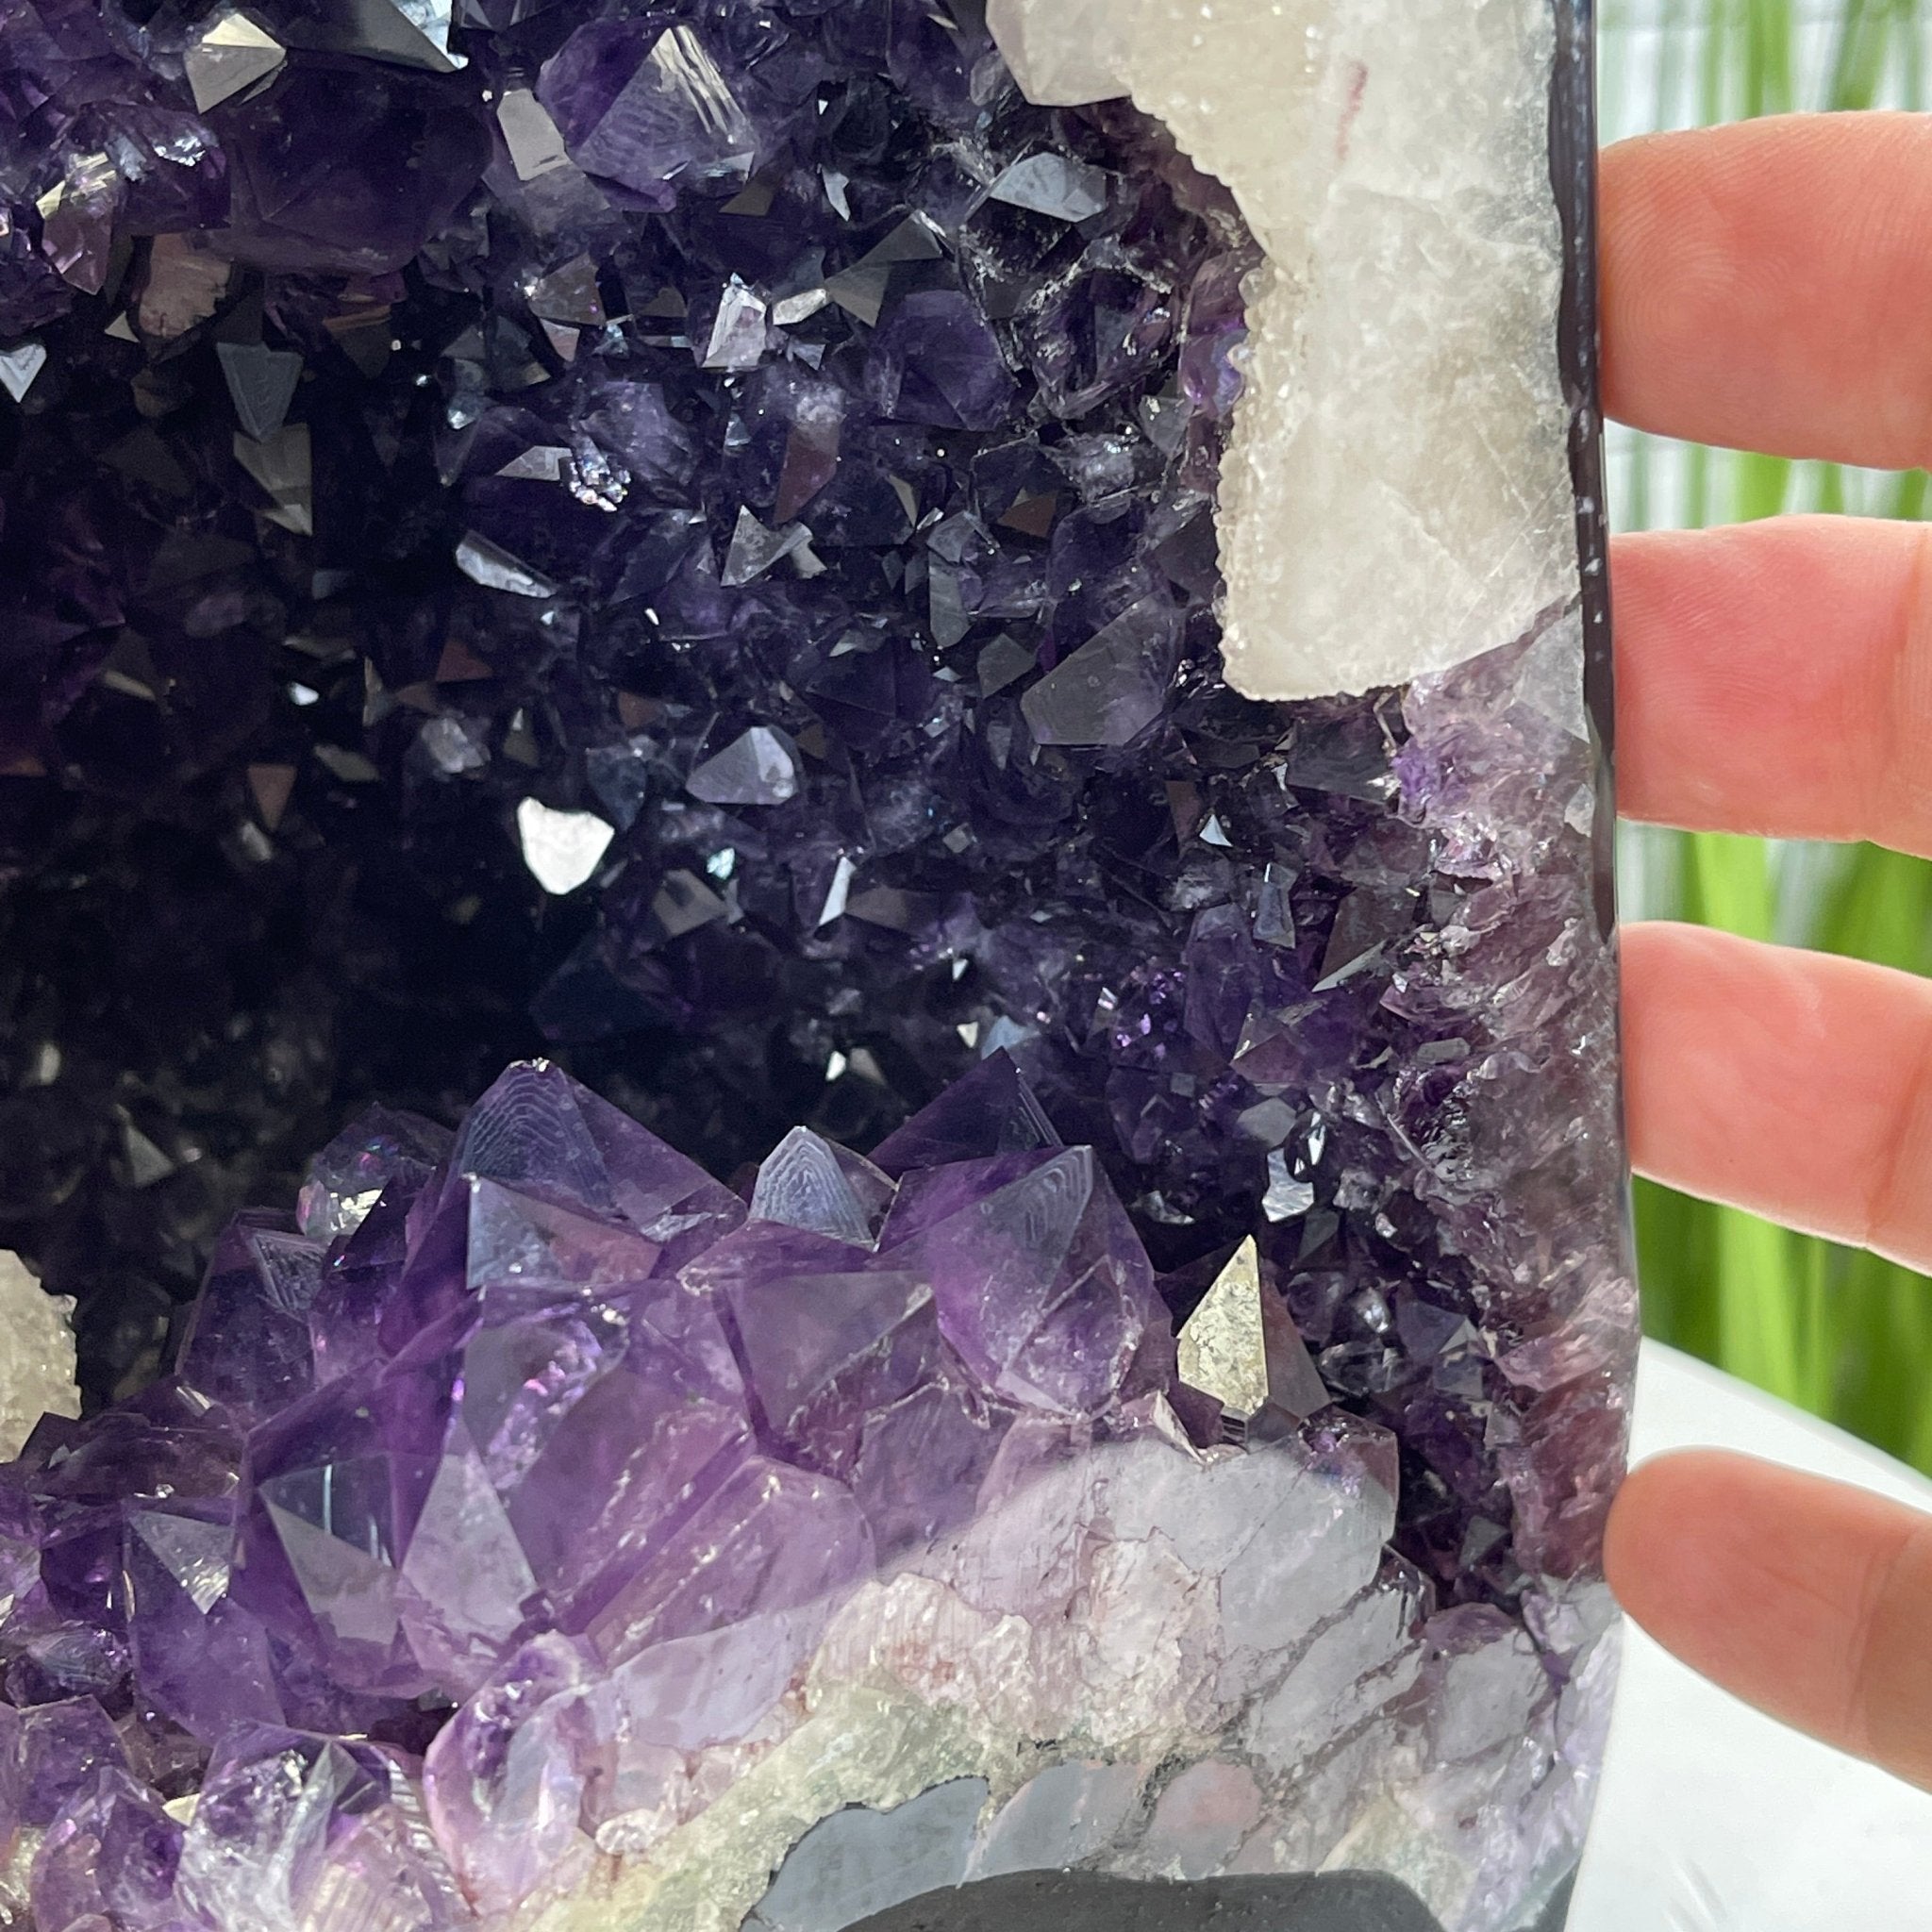 Super Quality Brazilian Amethyst Cathedral, 13 lbs & 10.8" Tall #5601-1111 by Brazil Gems - Brazil GemsBrazil GemsSuper Quality Brazilian Amethyst Cathedral, 13 lbs & 10.8" Tall #5601-1111 by Brazil GemsCathedrals5601-1111